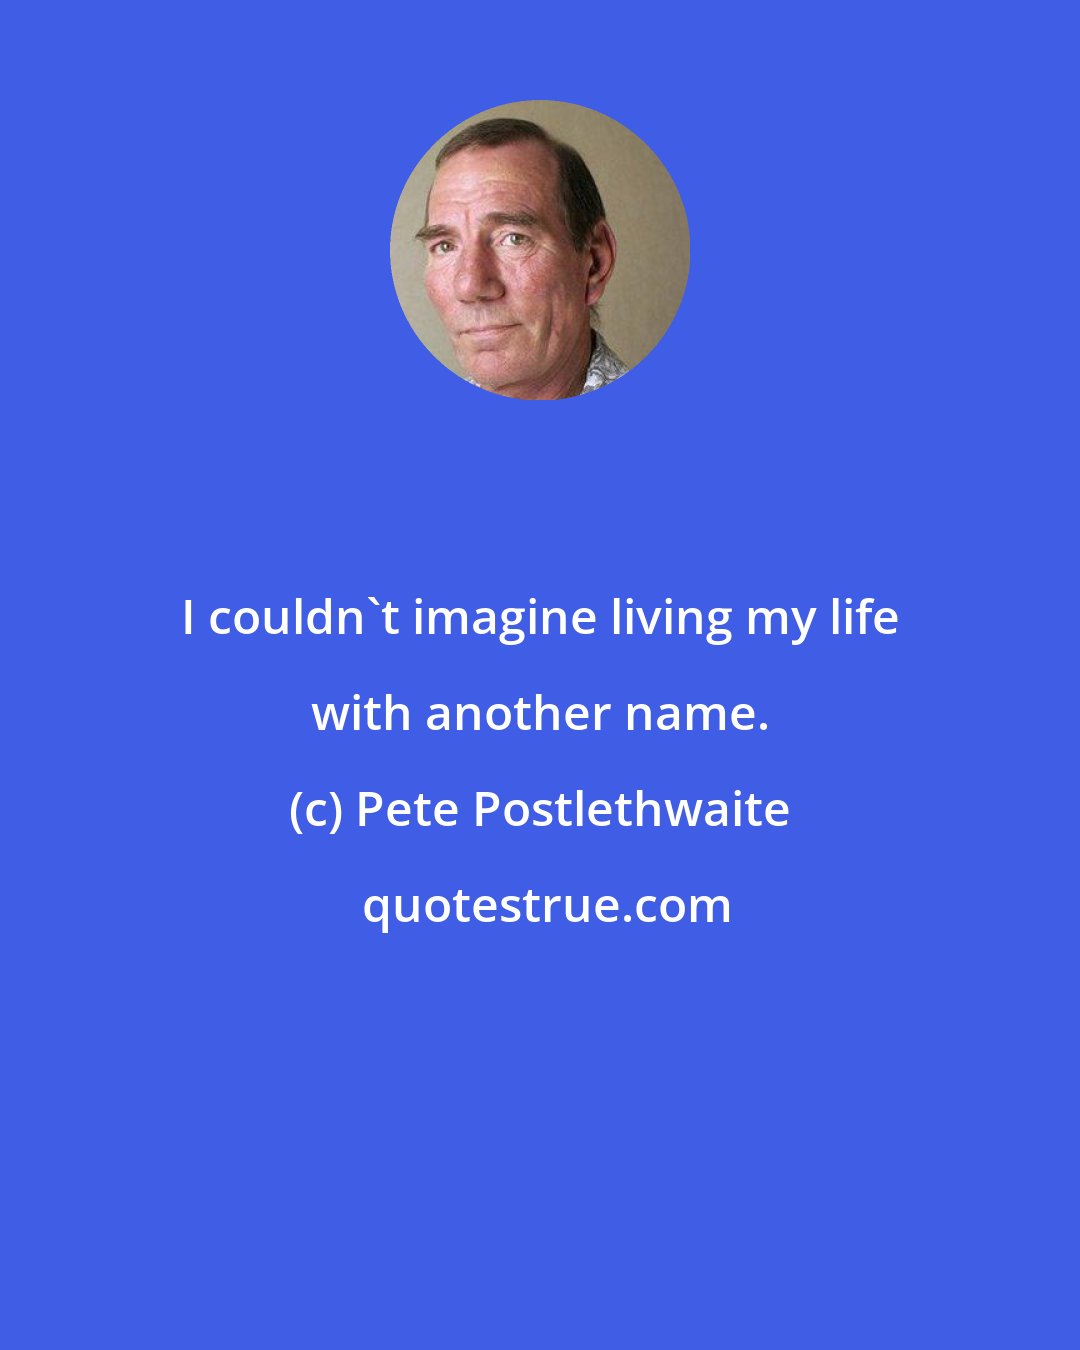 Pete Postlethwaite: I couldn't imagine living my life with another name.